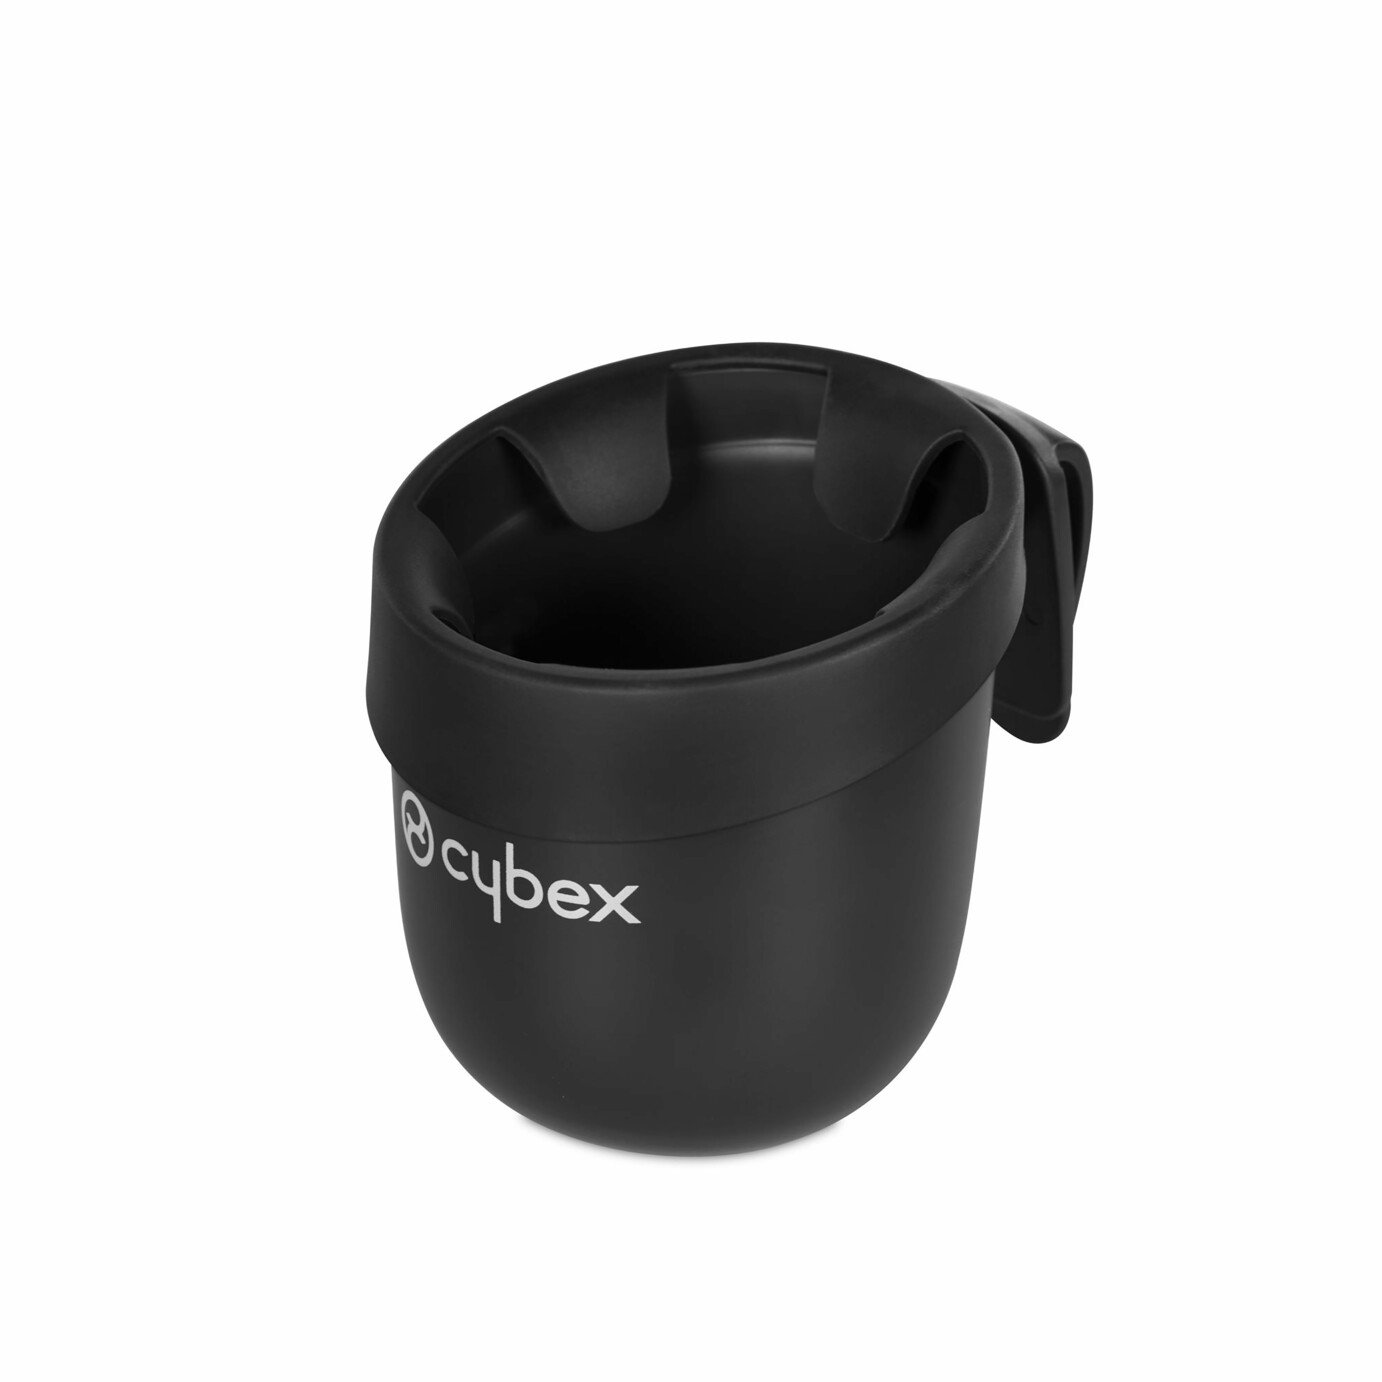 Cybex Car Seat Cup Holder Review